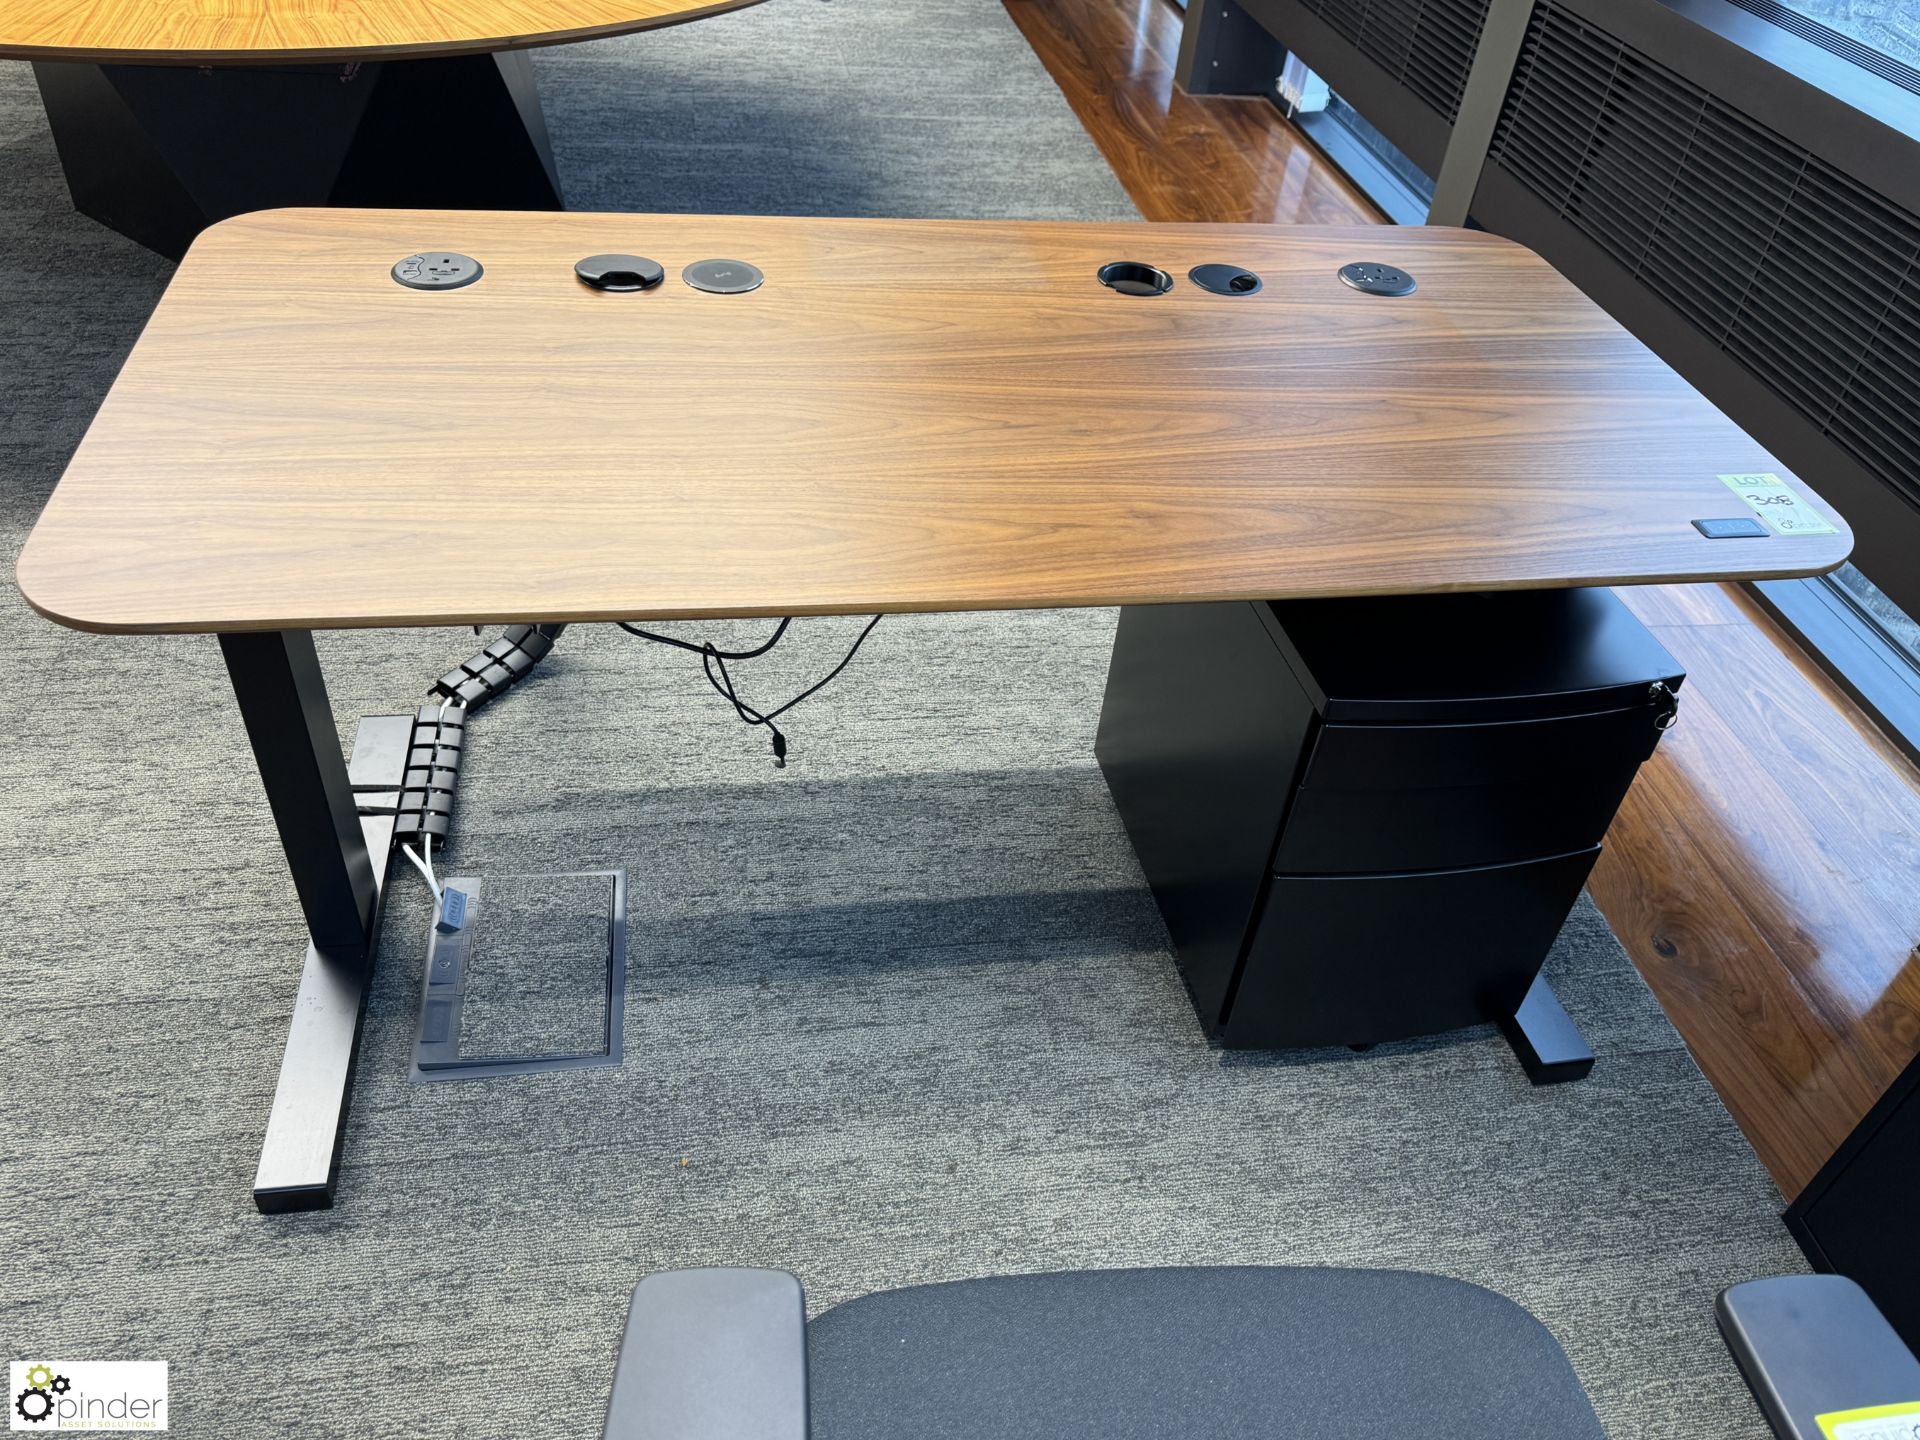 OMT powered rise and fall Desk, Cherry veneer finish, 1600mm x 775mm, with steel 2-drawer - Image 2 of 6